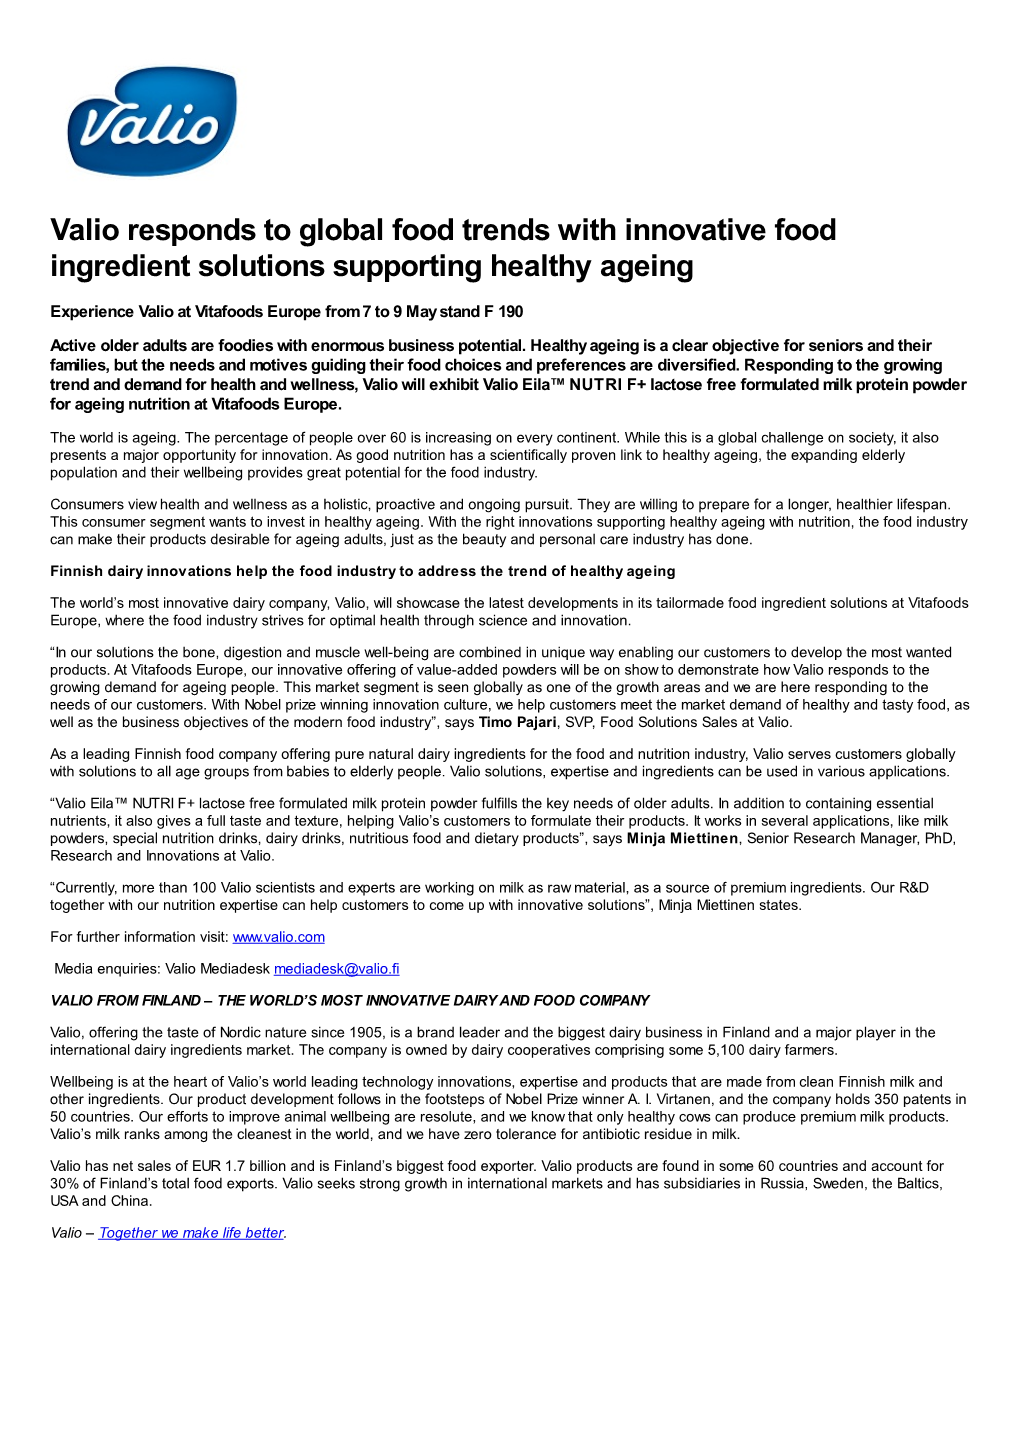 Valio Responds to Global Food Trends with Innovative Food Ingredient Solutions Supporting Healthy Ageing